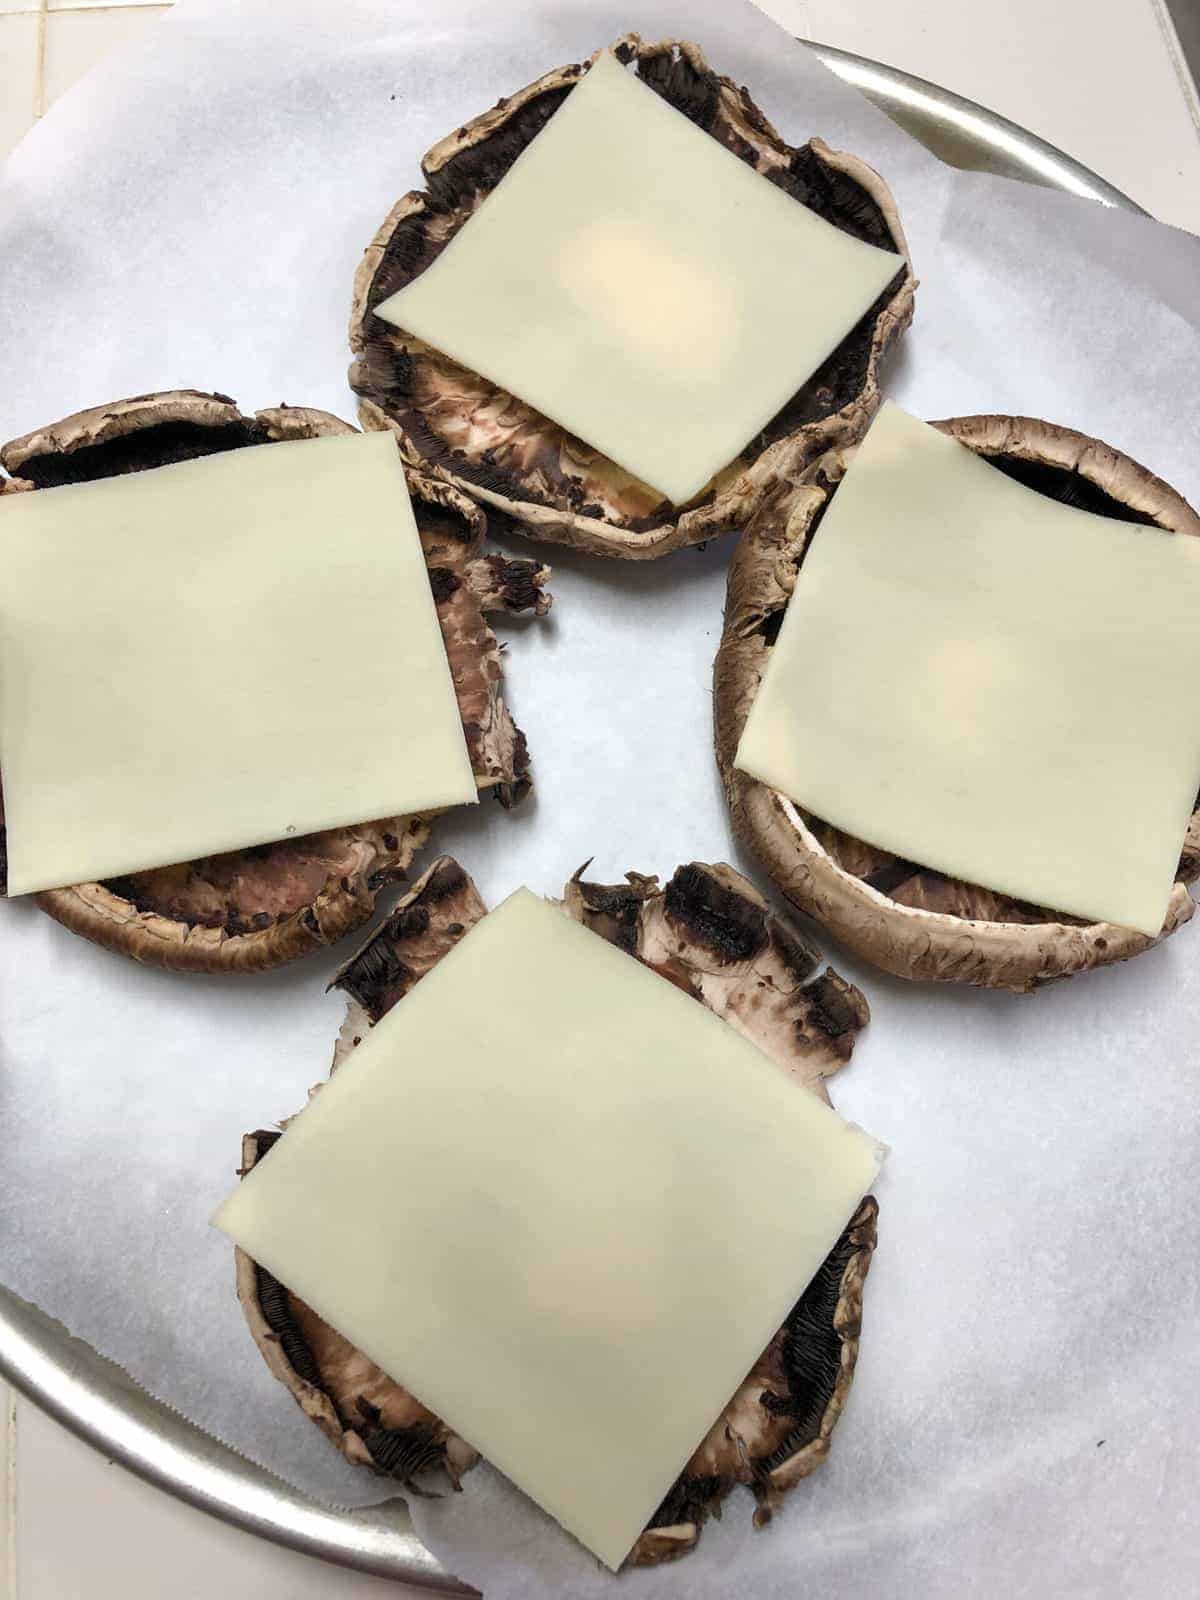 cleaned mushrooms with slice of cheese